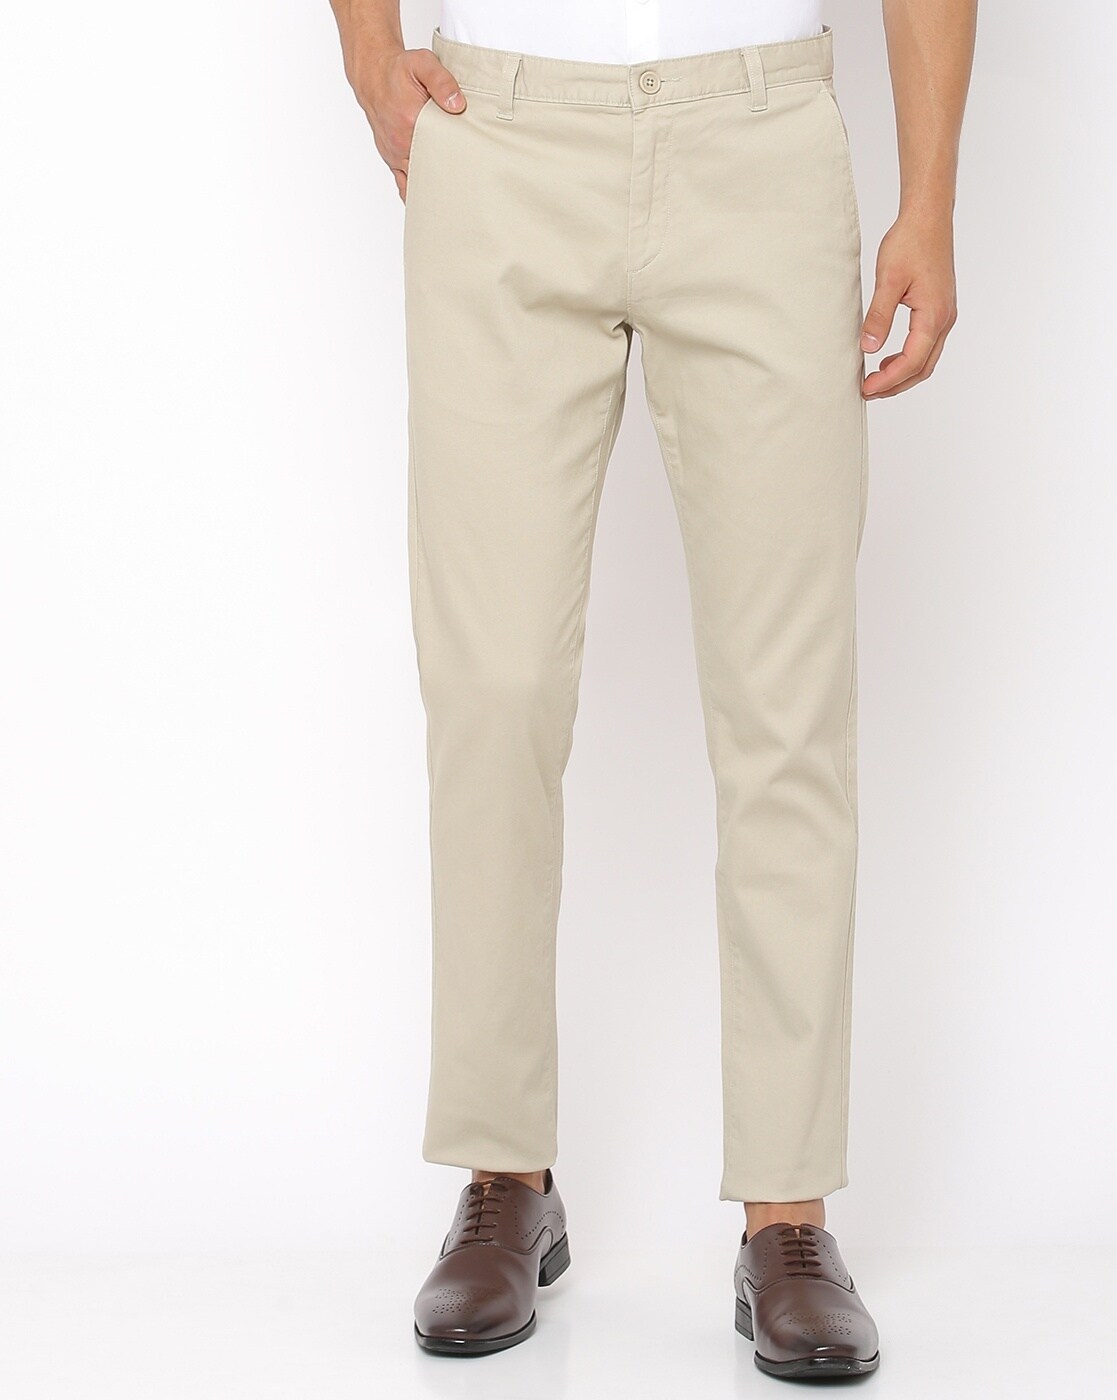 Selected Homme slim fit commuter suit pants in light brown | ASOS